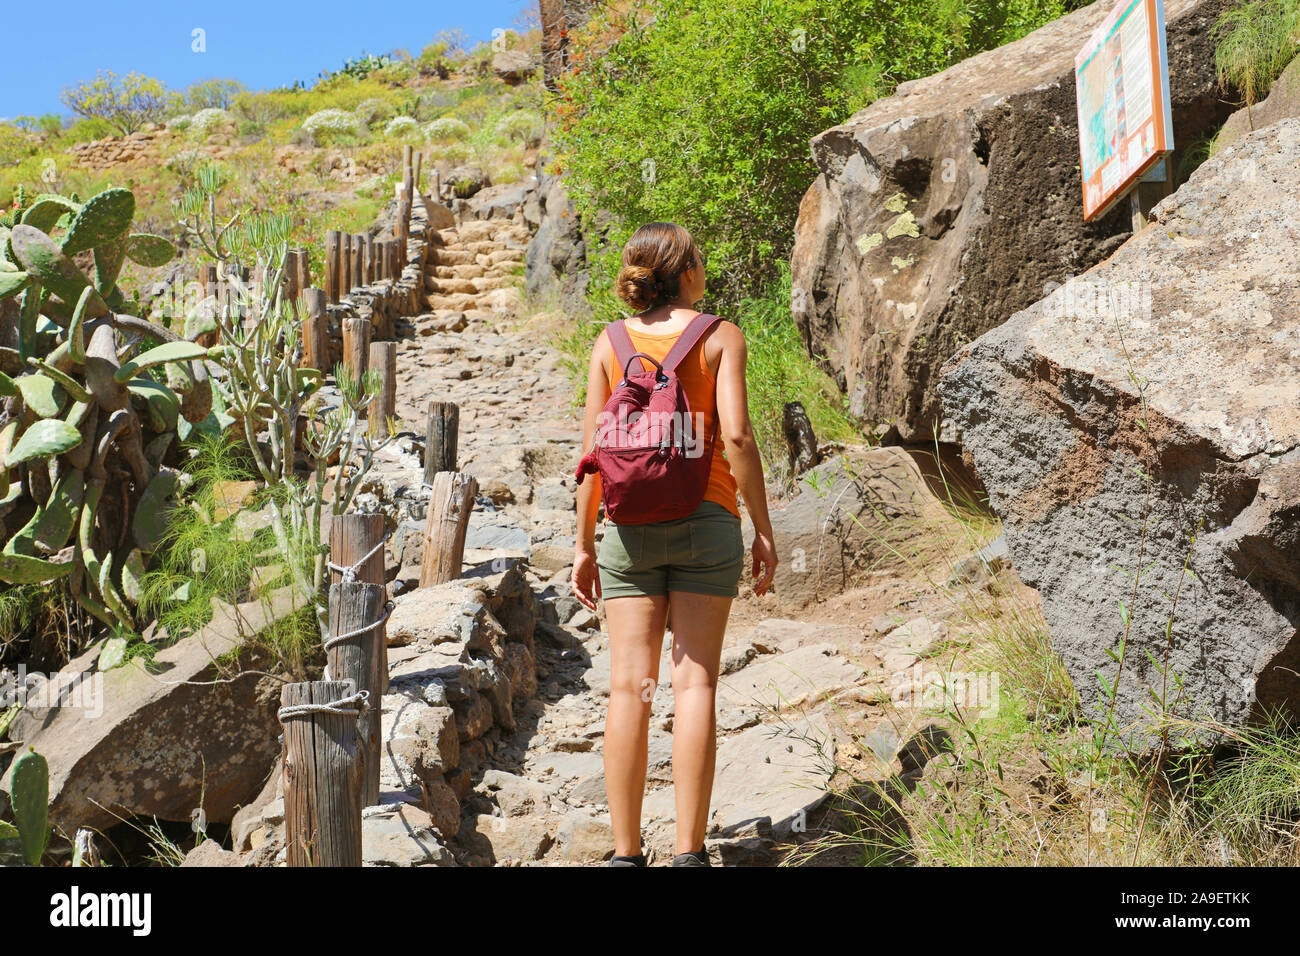 Tourist girl backpacker reading map on the tourist path in Tenerife, Canary Islands, Spain. Stock Photo